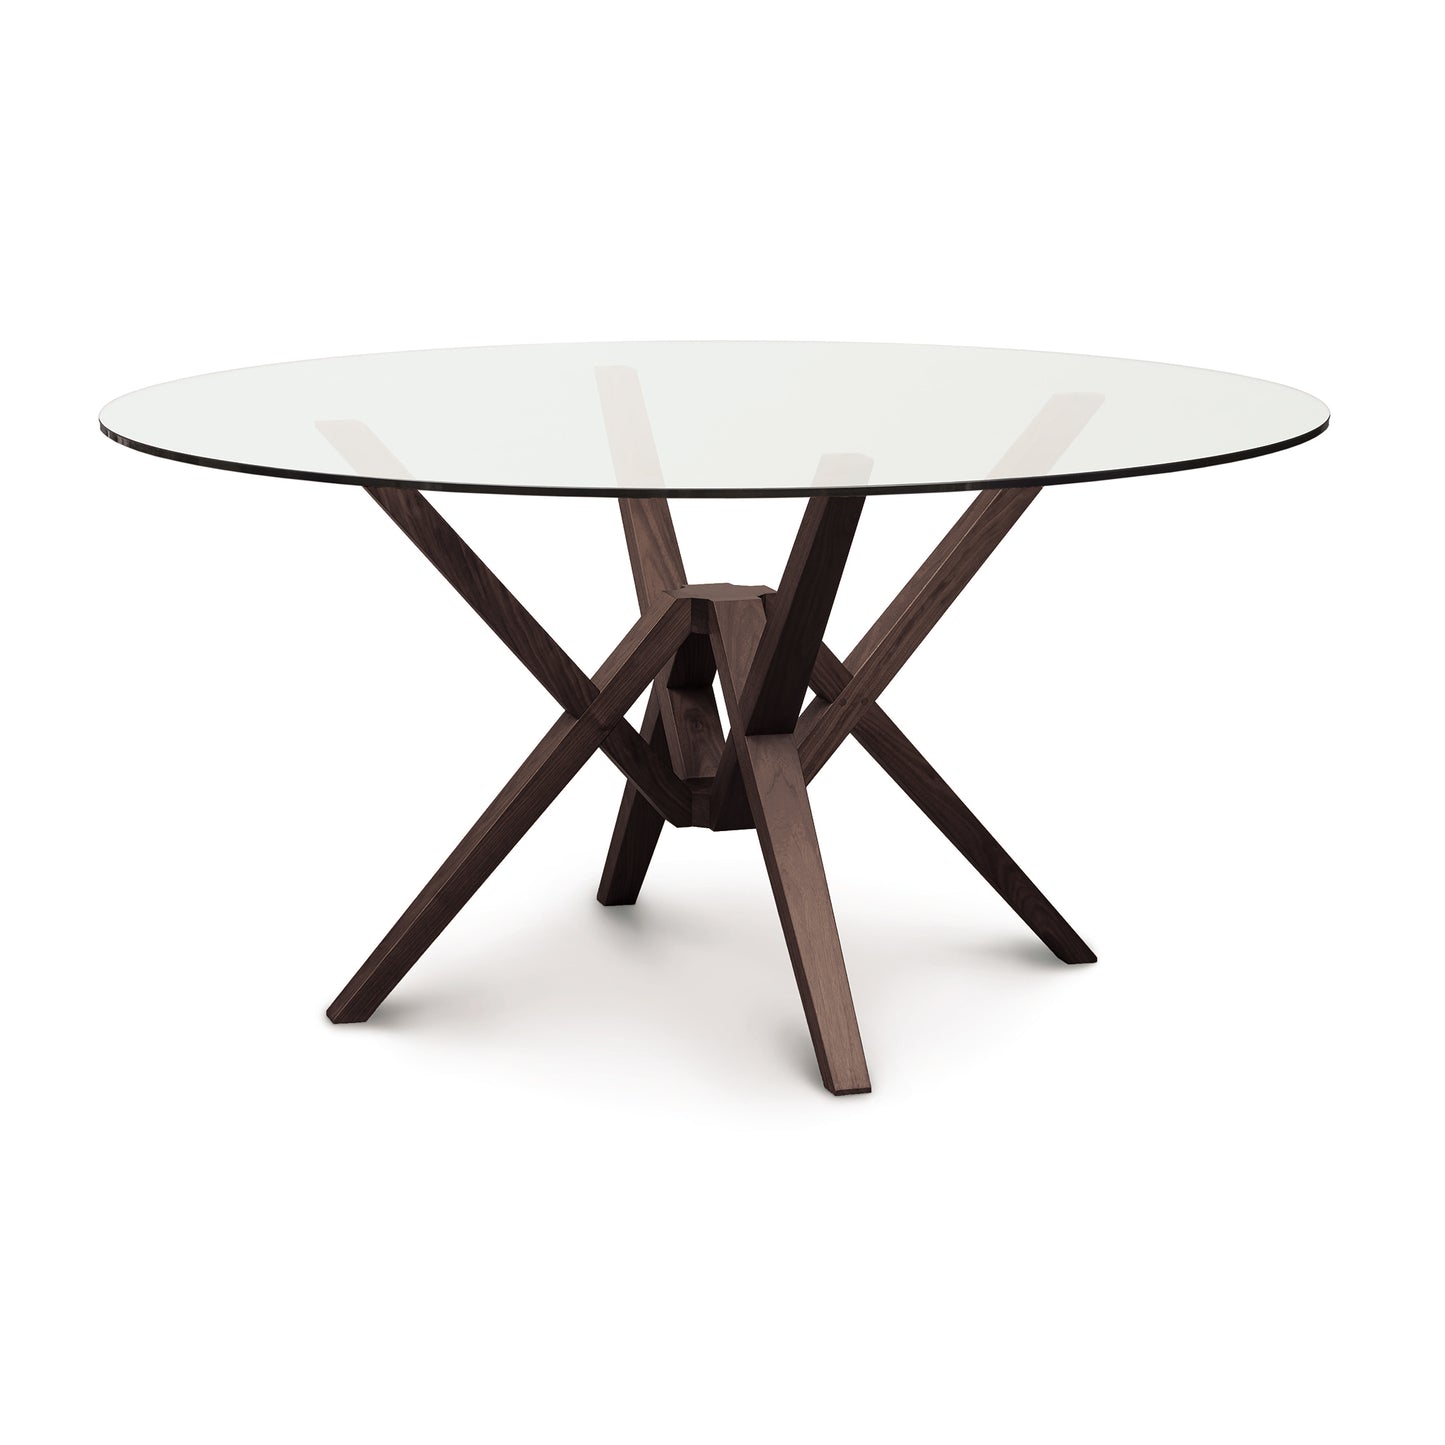 The Copeland Furniture Exeter Round Glass Top Table combines innovative engineering with an isometric design. Its modern wooden base supports a sleek round glass dining surface.